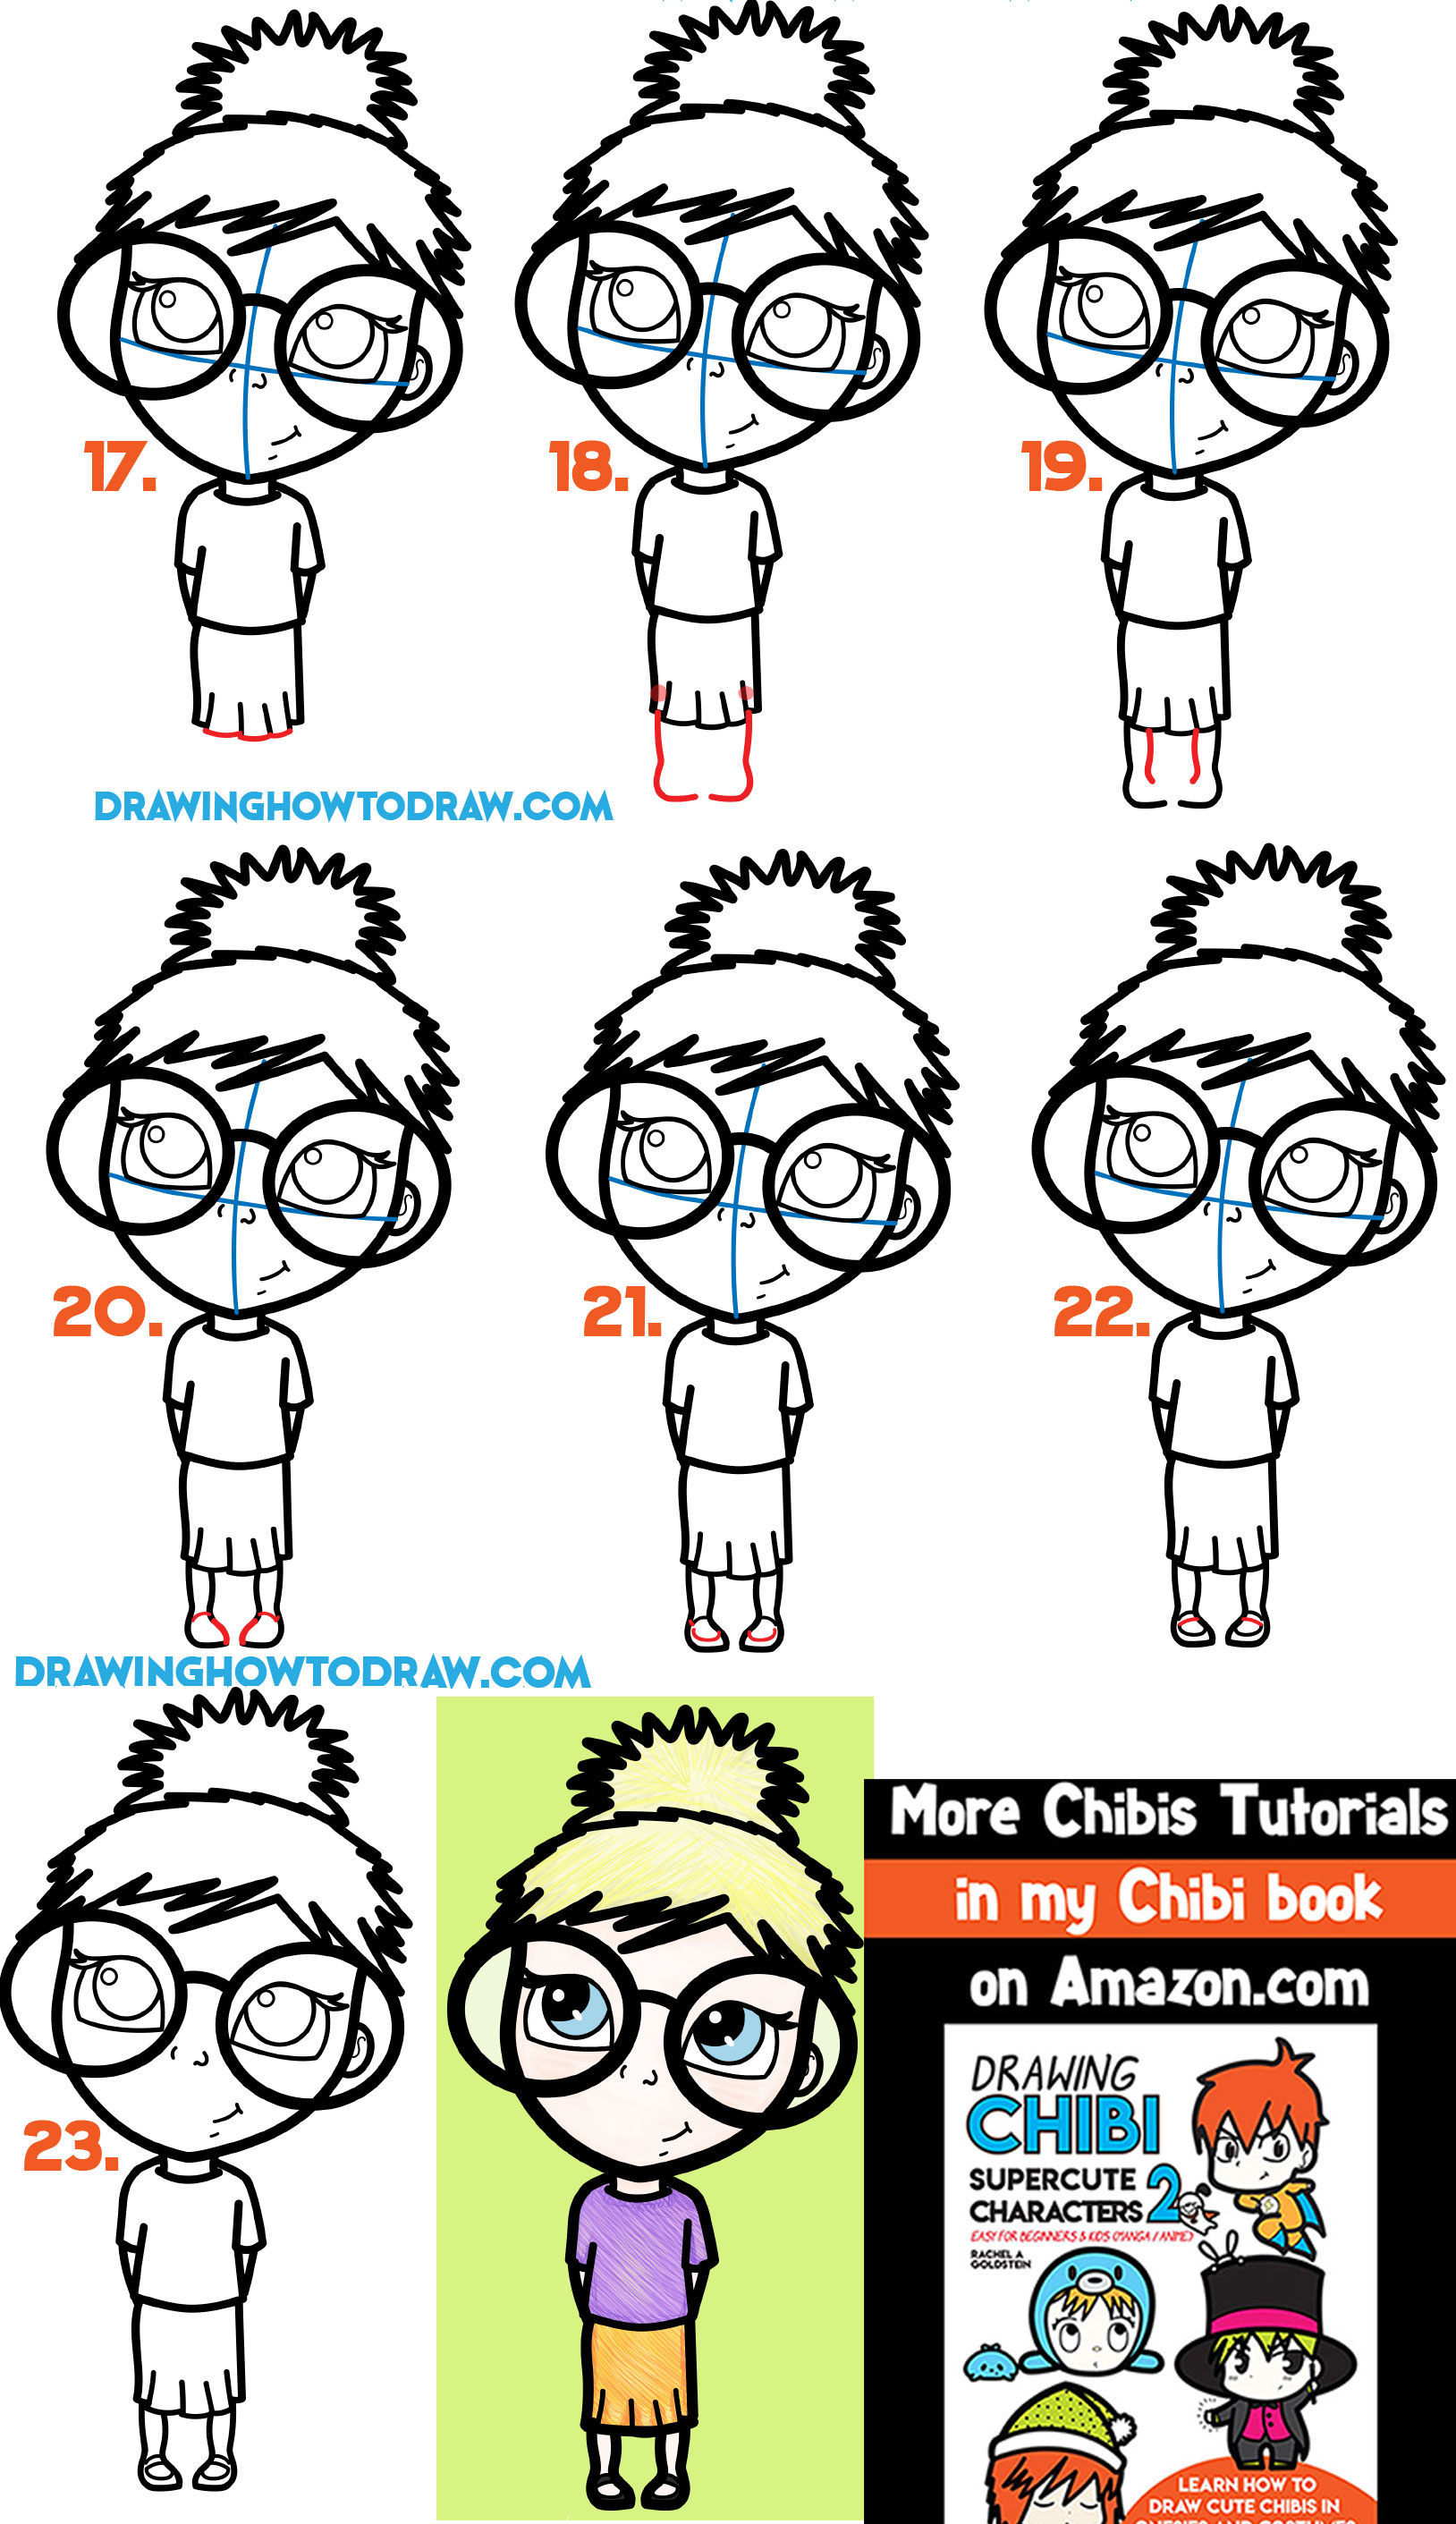 Learn How to Draw a Cute Cartoon Girl with Glasses - Simple y Steps Drawing Lesson for Kids